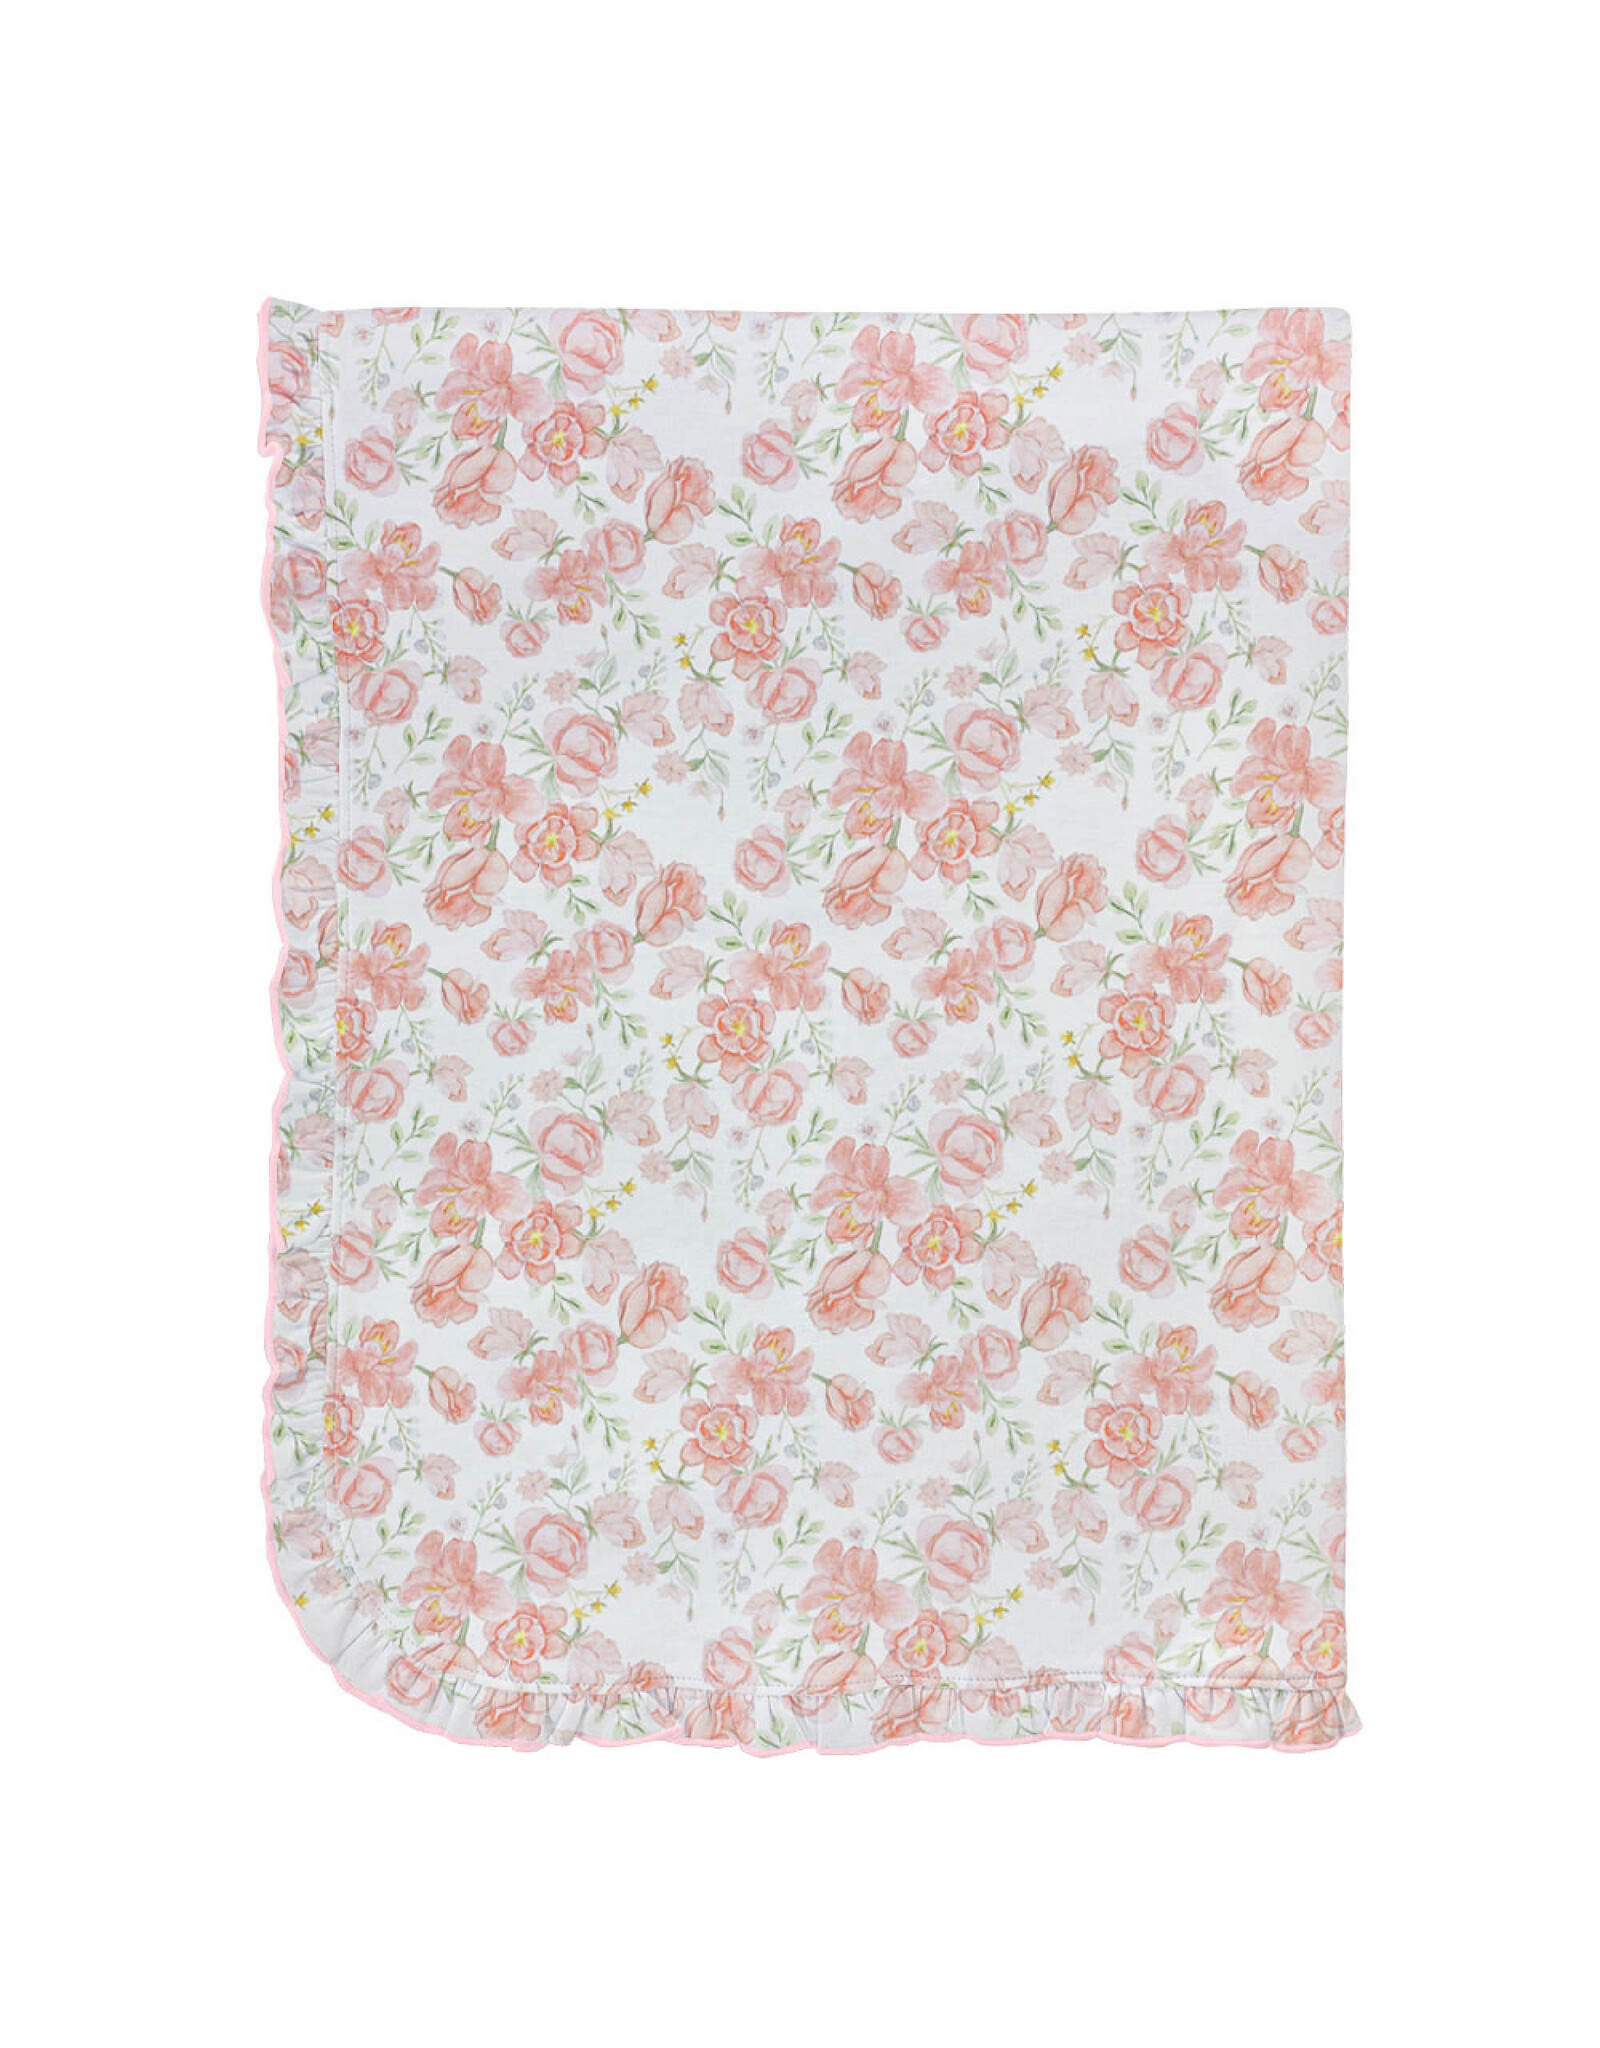 Baby Club Chic Pastel Floral Blanket with Ruffle